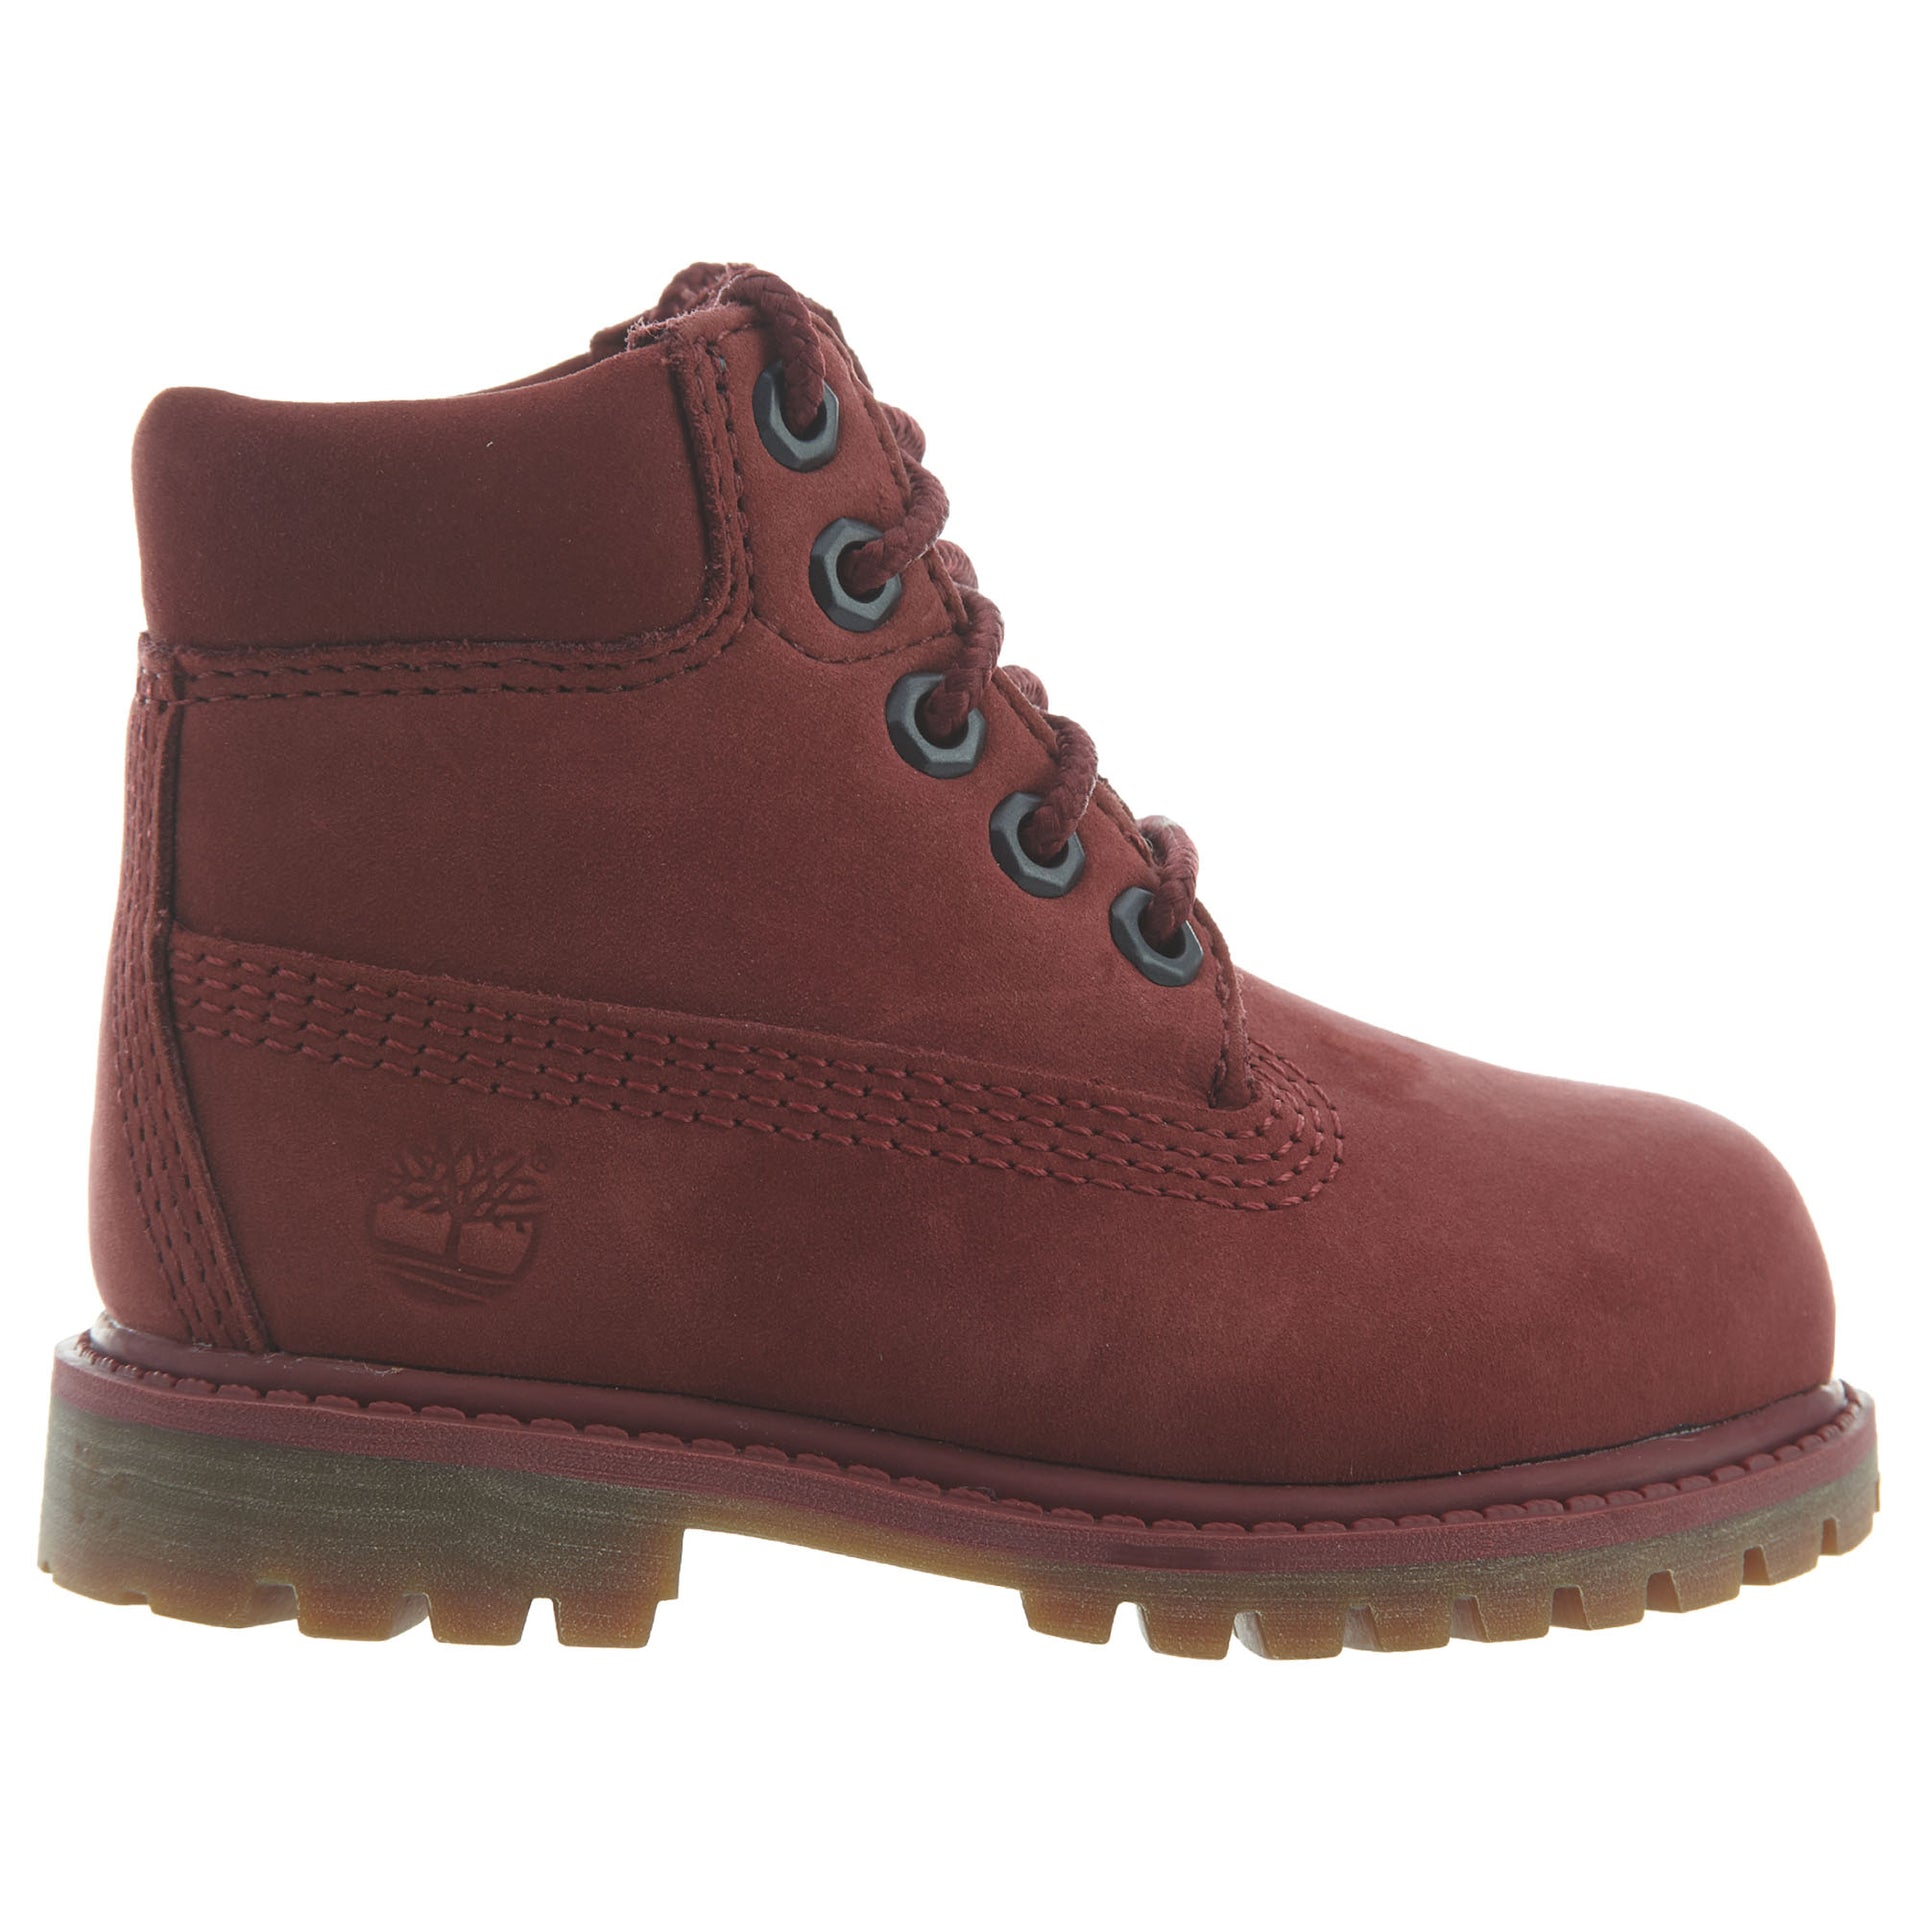 Timberland 6" Premium Boot Toddlers Style : Tb0a1vgc-M49